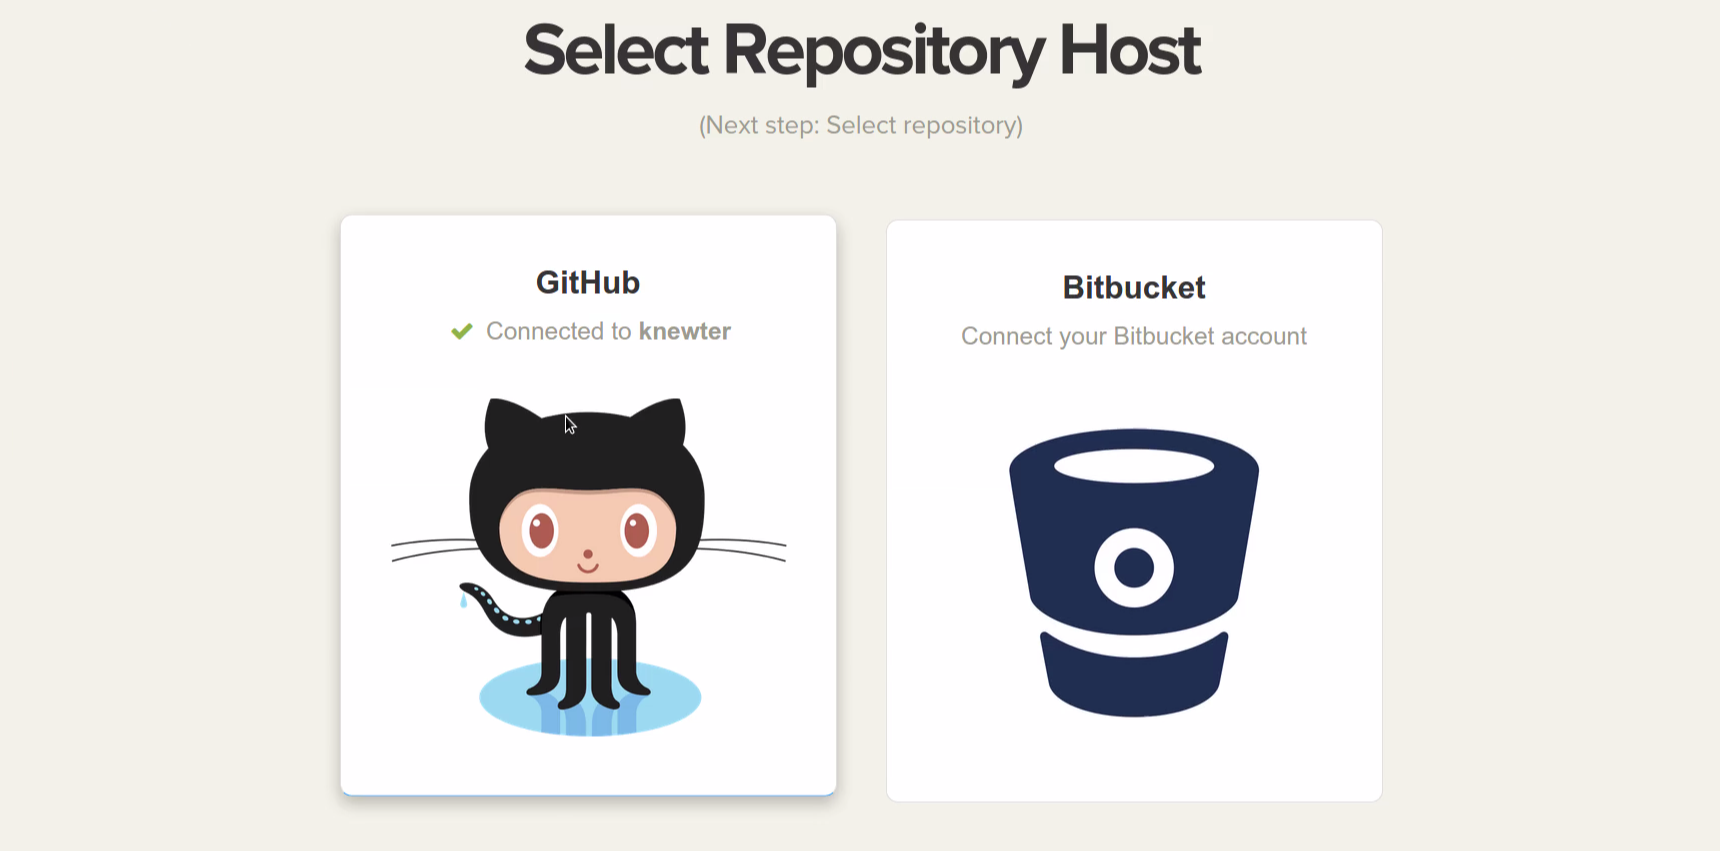 Select Repository Host